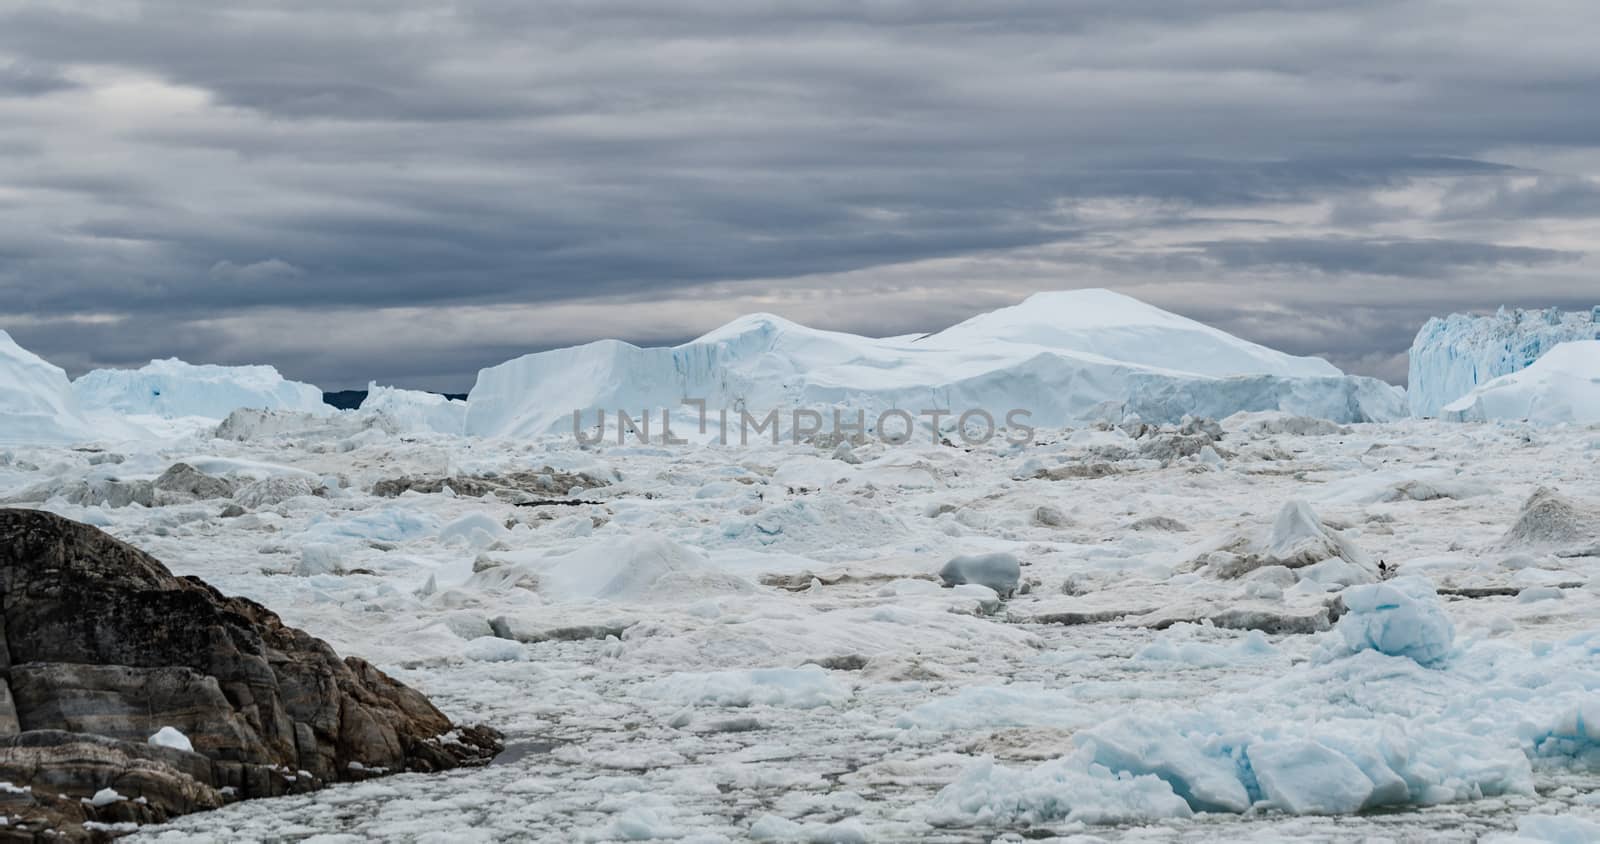 Icebergs from melting glacier in icefjord - Global Warming and Climate Change by Maridav